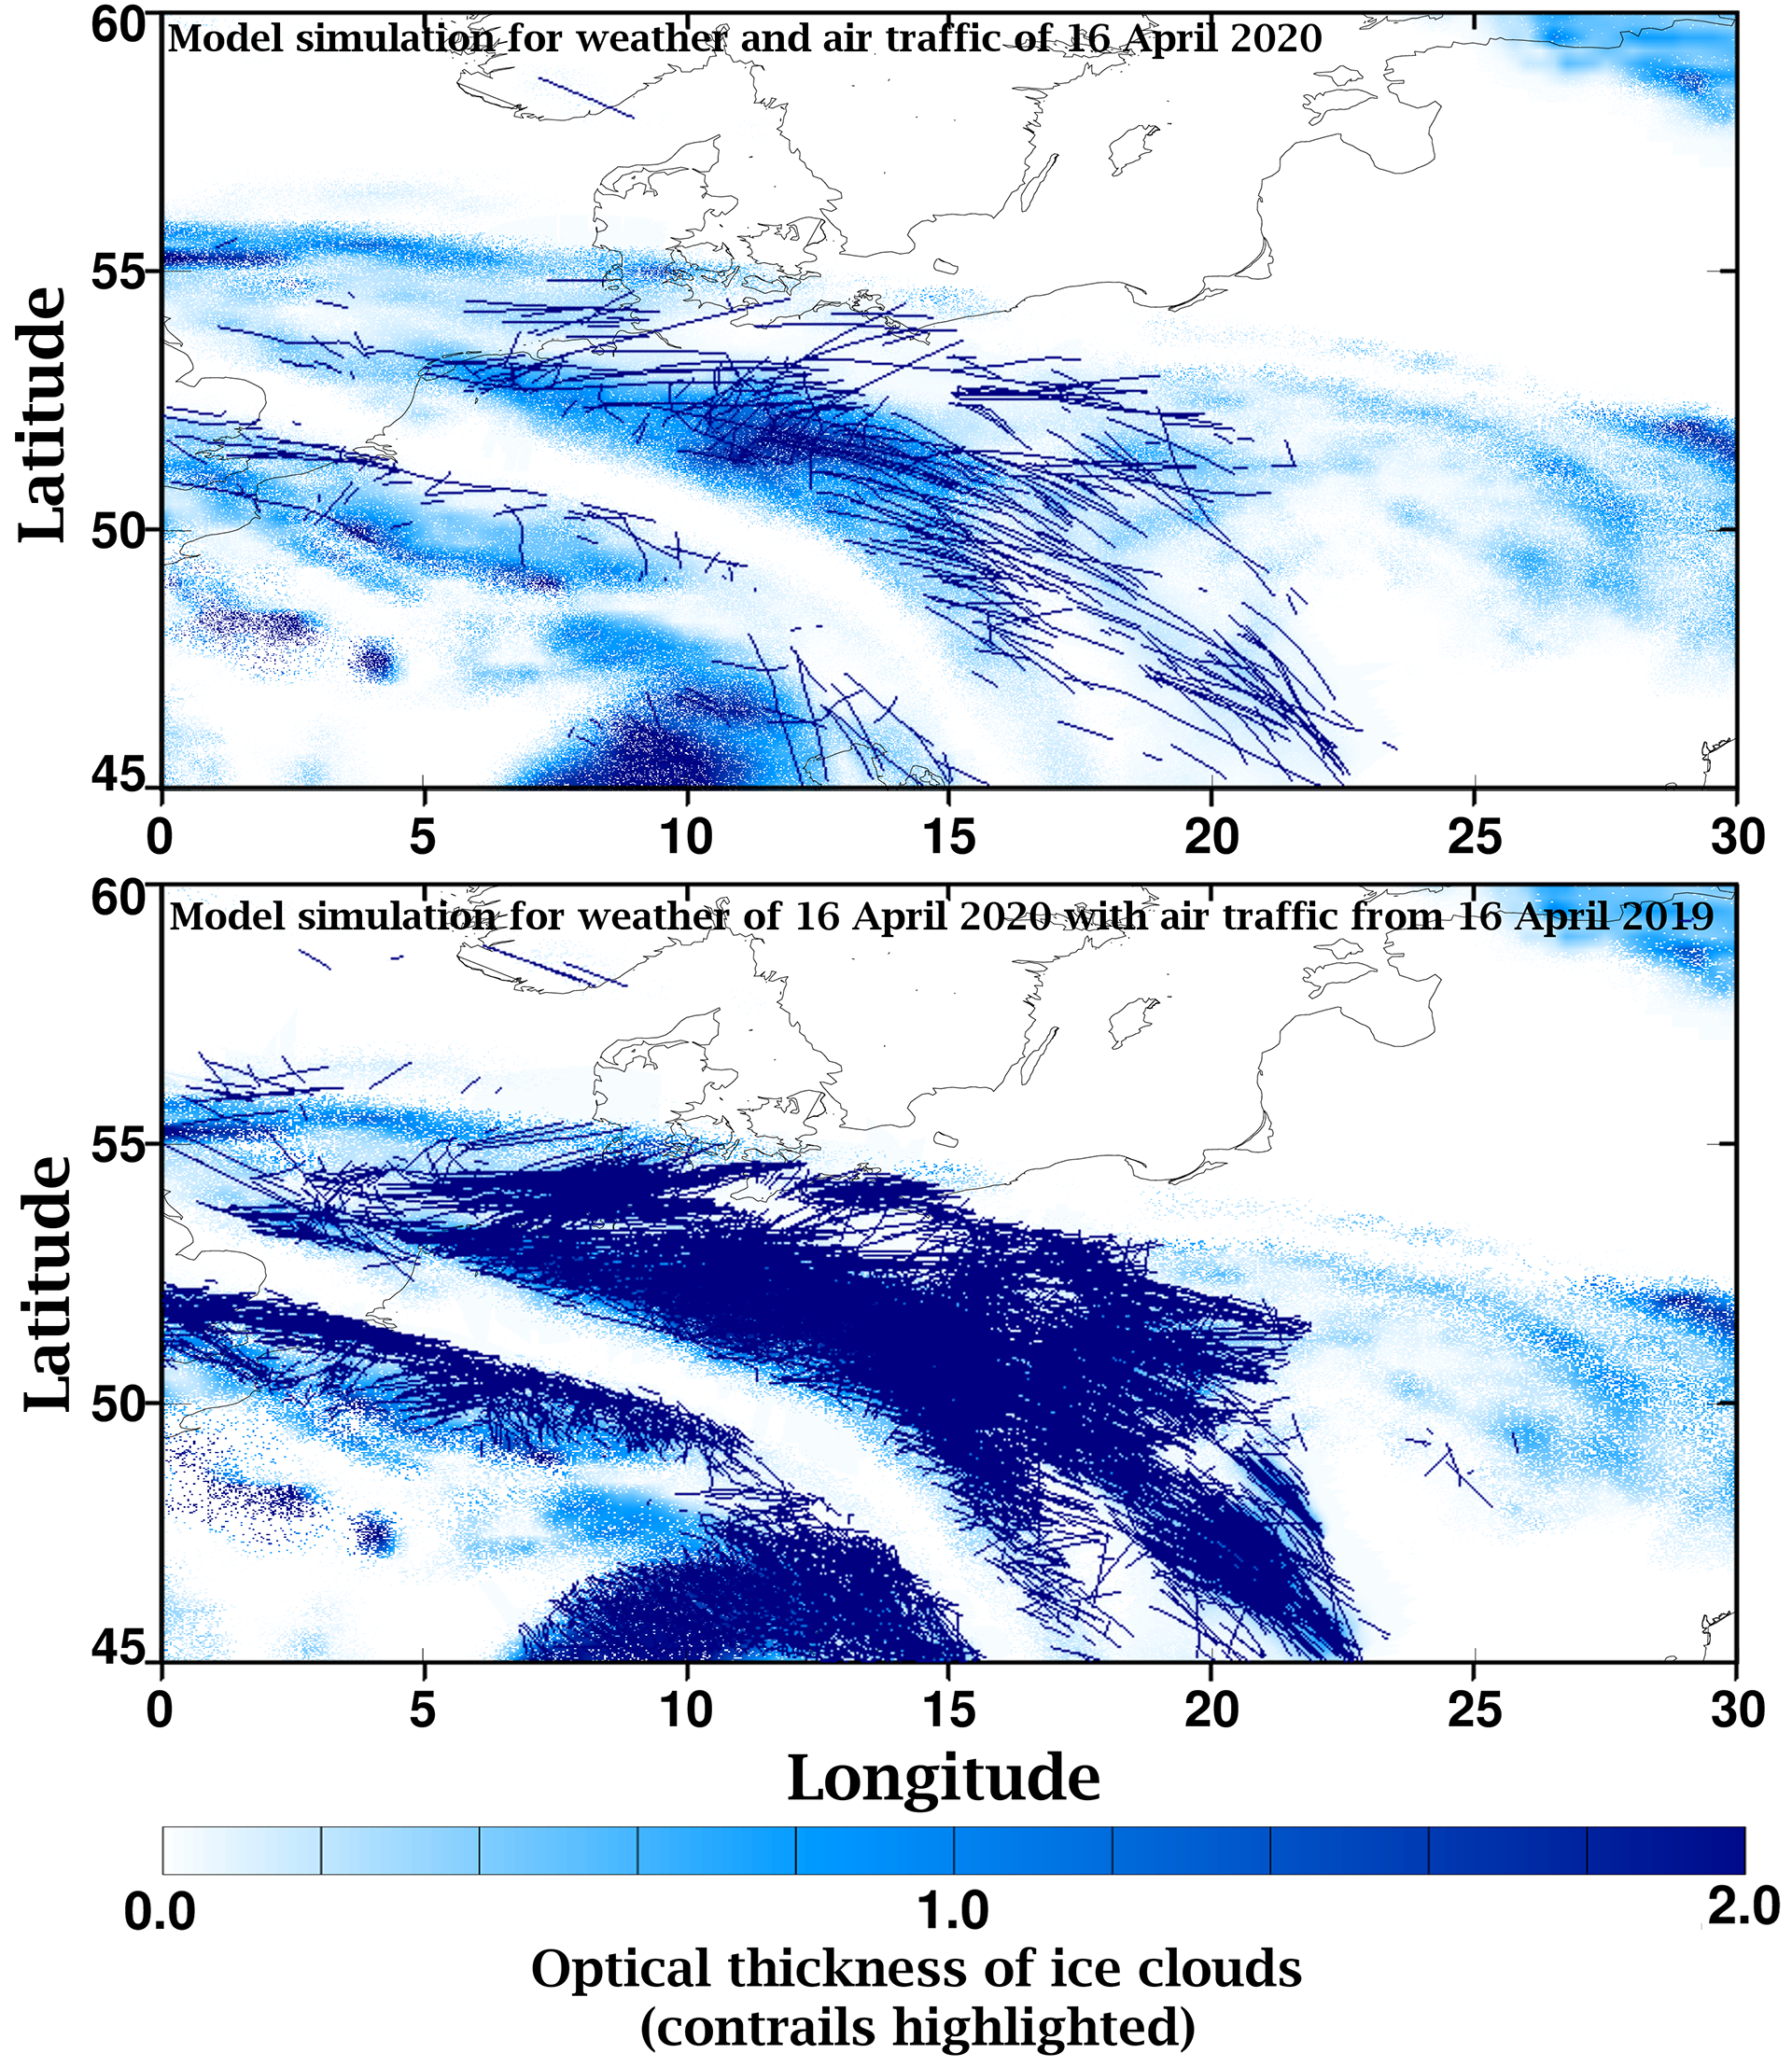 Comparison of condensation trail coverage on 16 April 2020 for different air traffic conditions (contrails graphically highlighted)